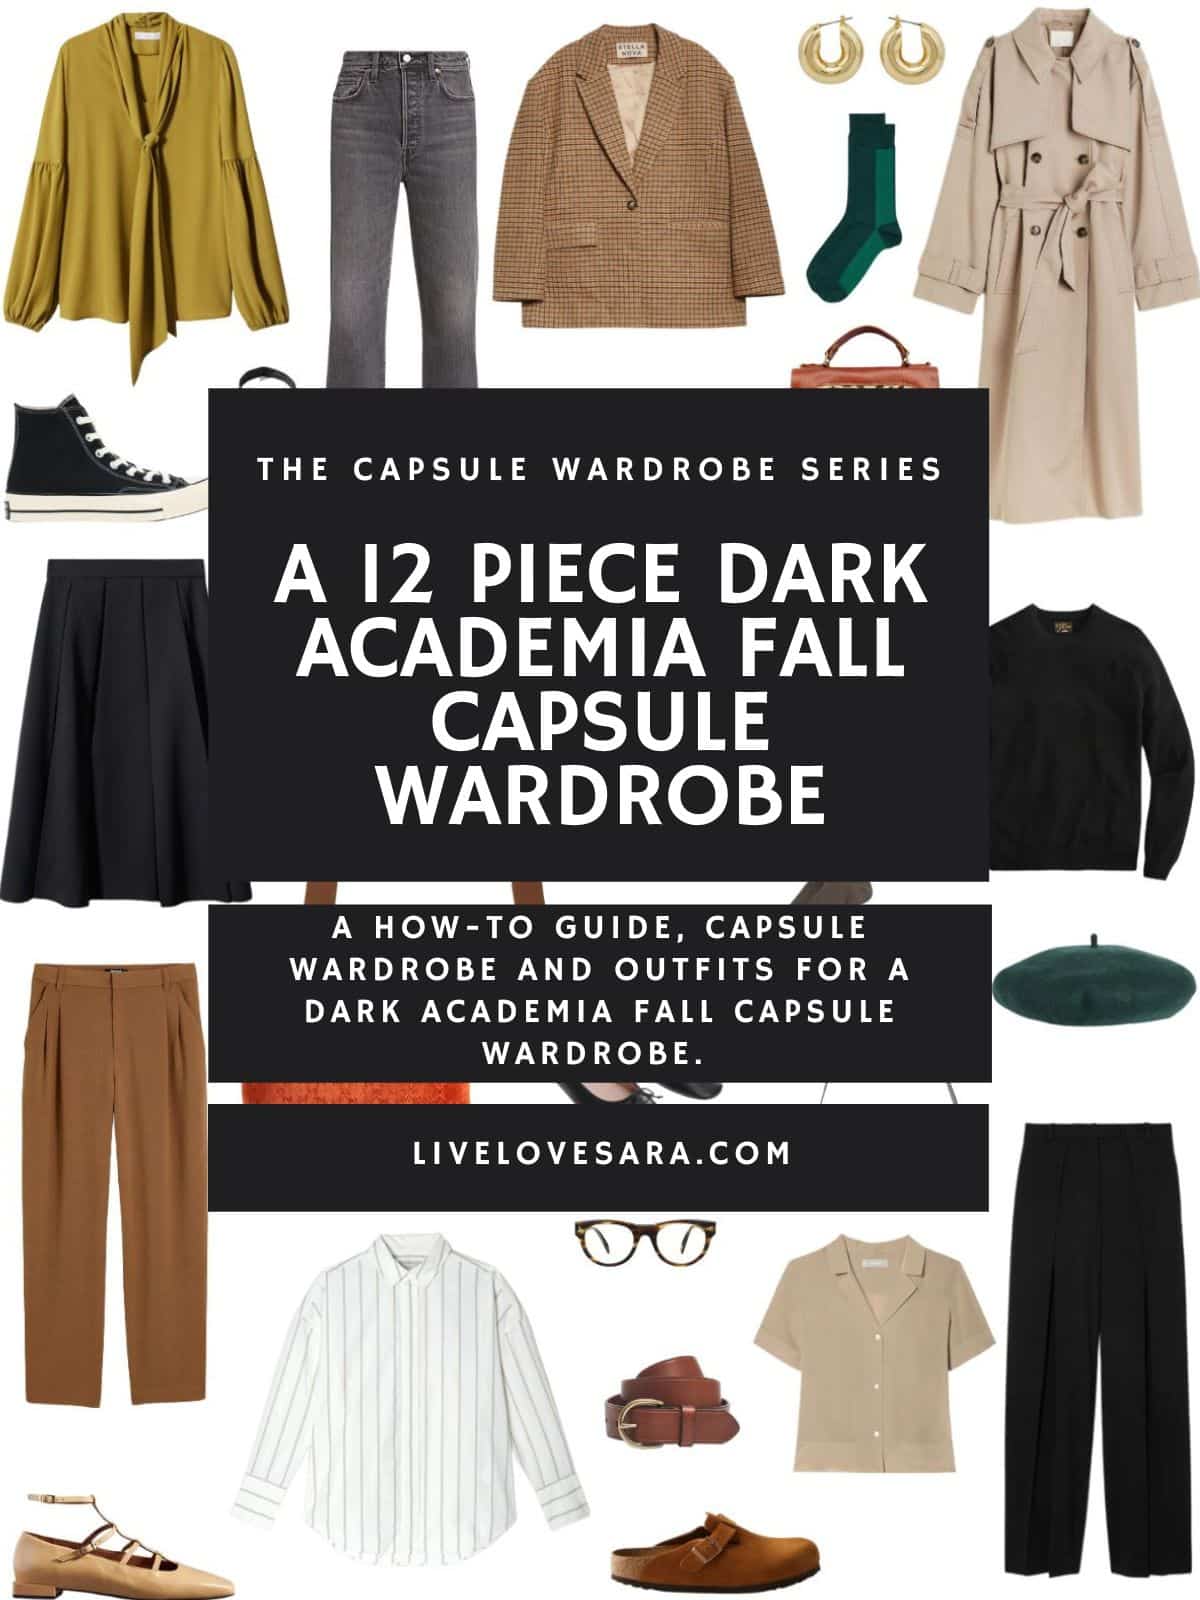 A white background with 12 clothing items plus shoes and accessories for a Dark Academia capsule wardrobe. In the middle is a black box with white text that reads, "A 12 Piece Dark Academia Capsule Wardrobe."